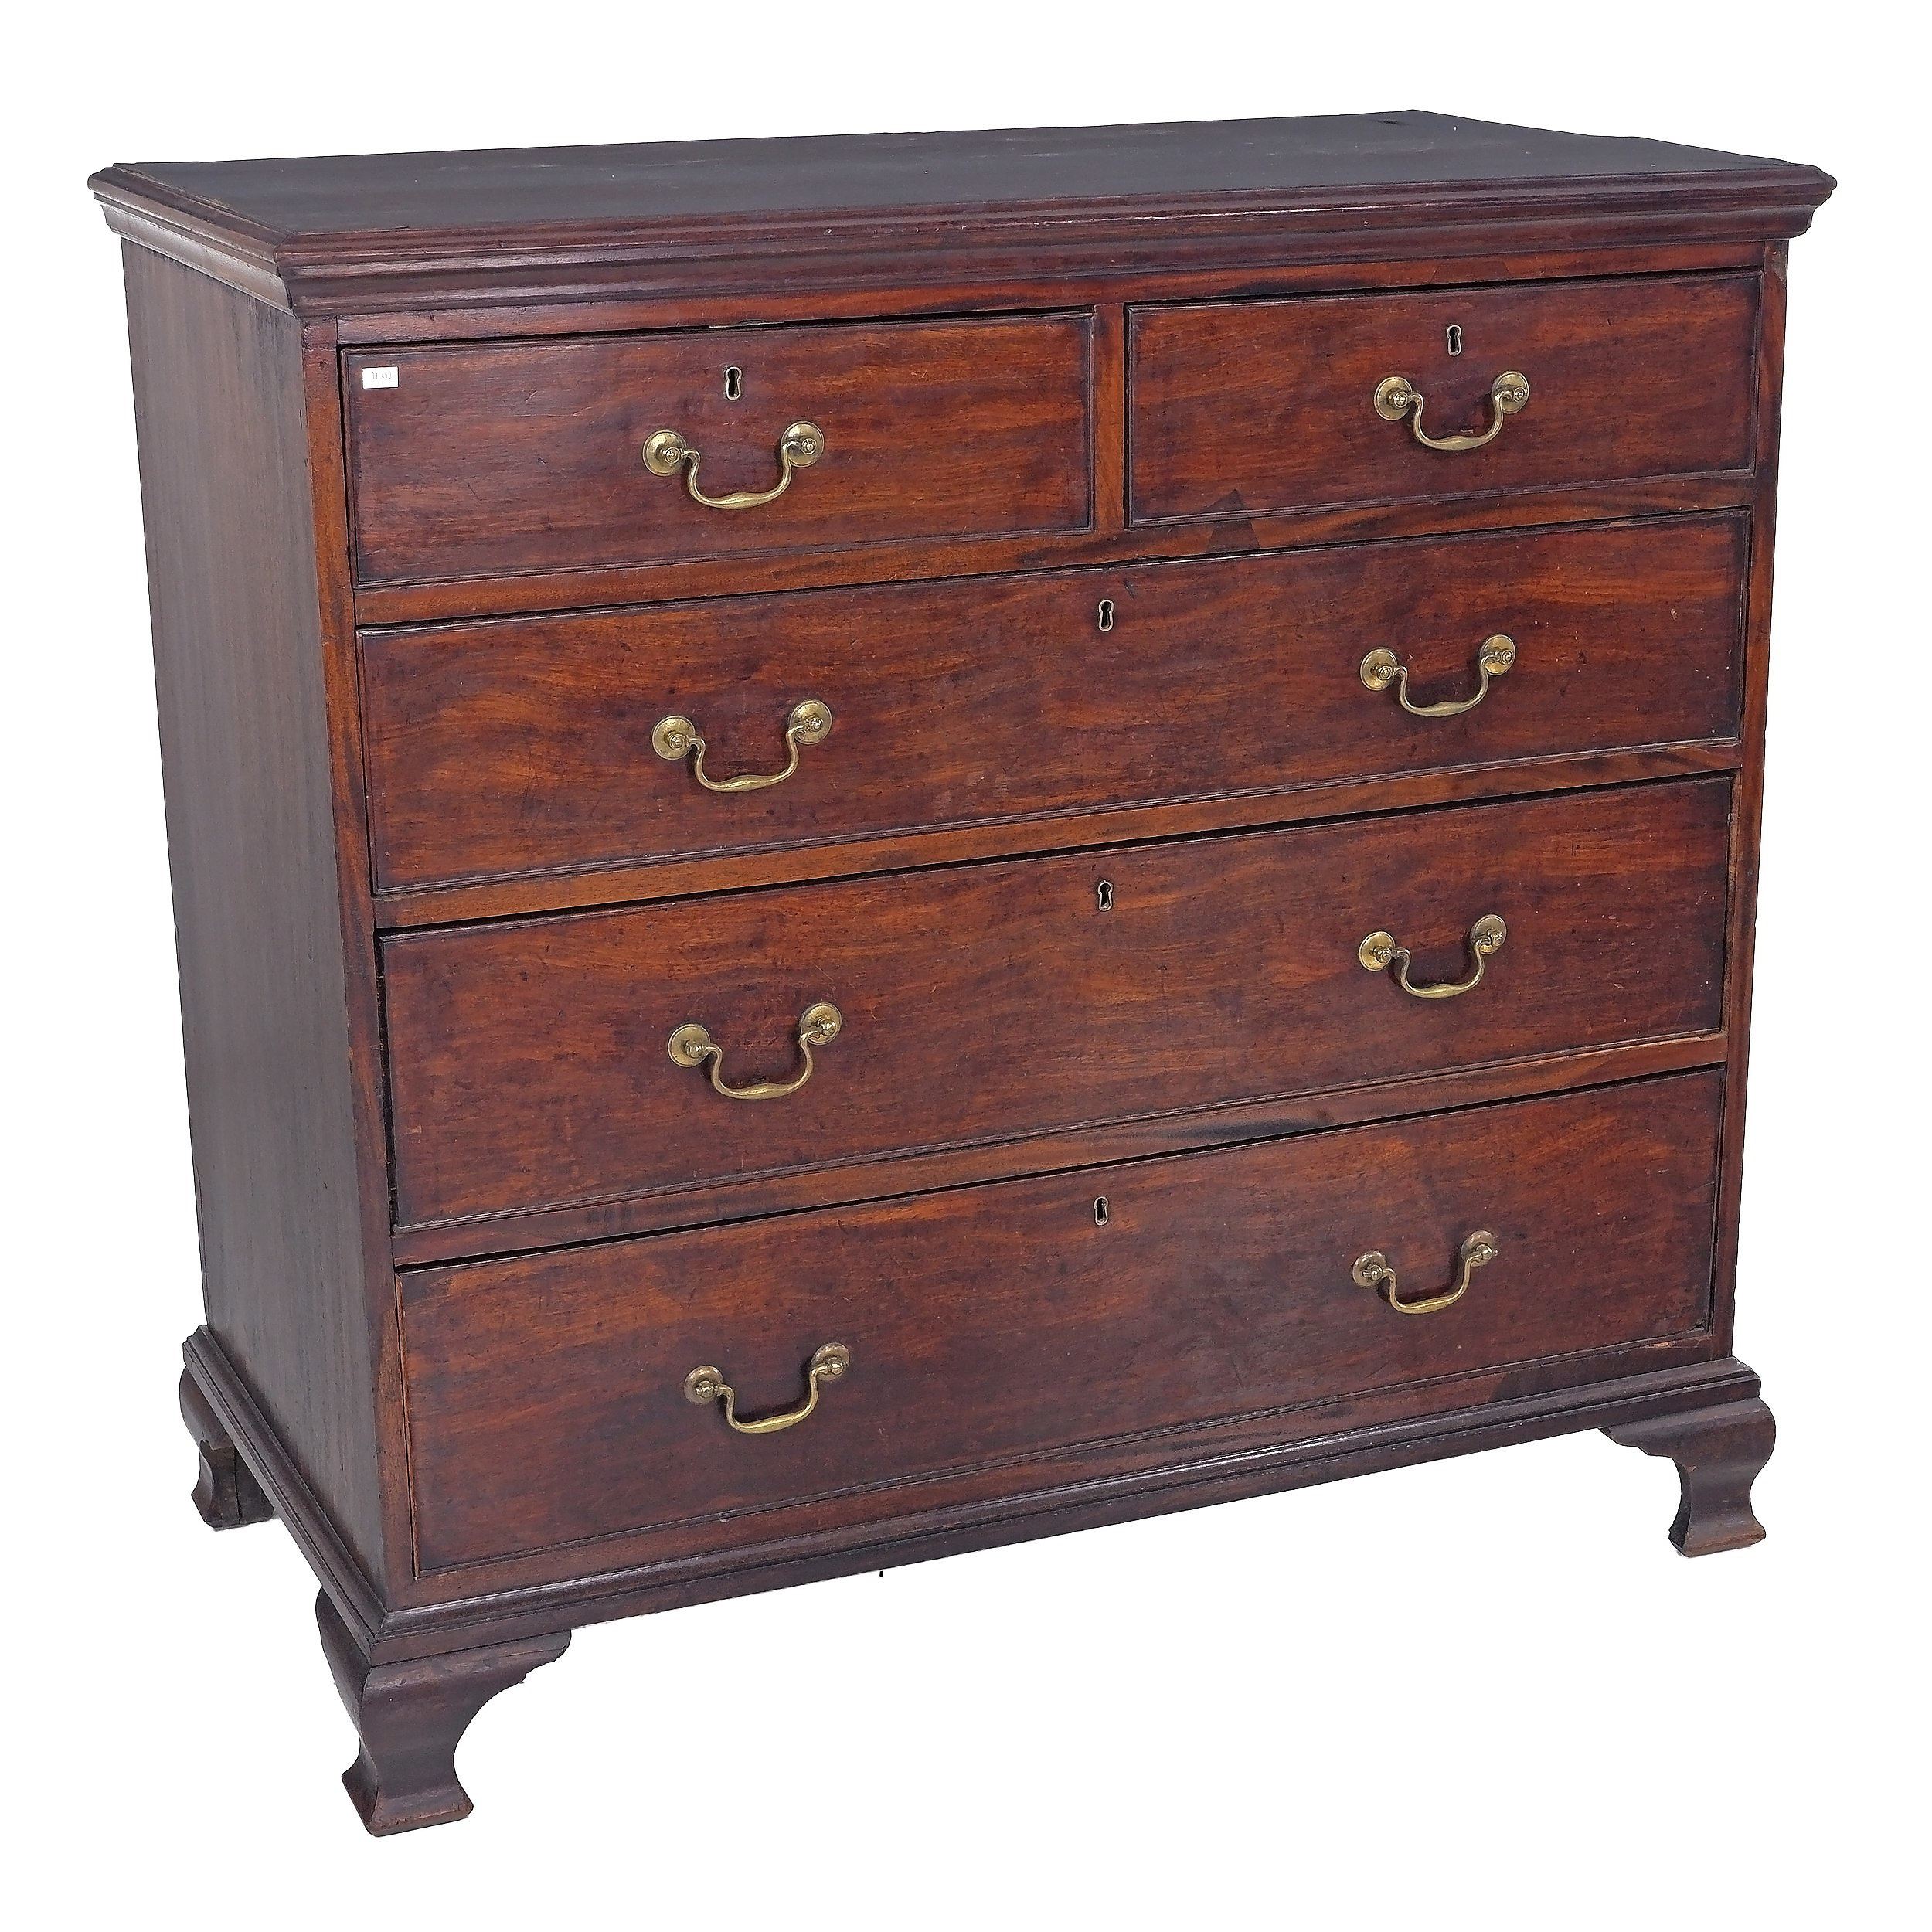 'George III Mahogany Chest of Drawers on Ogee Bracket Feet, Early 19th Century'